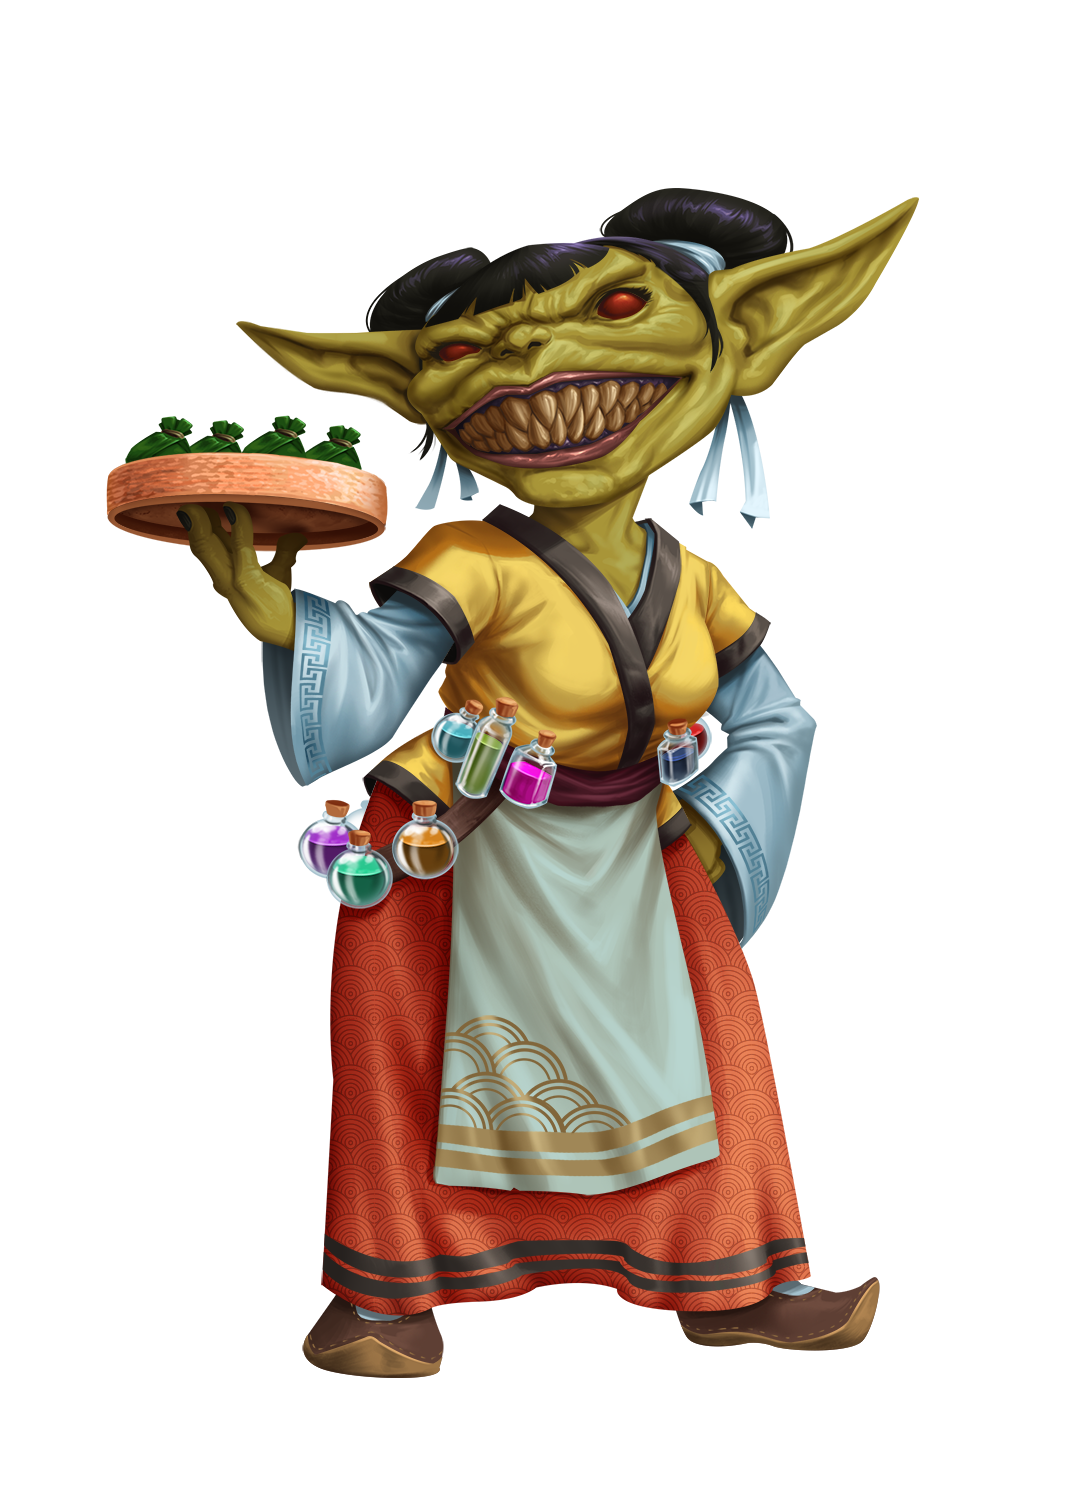 A female goblin in traditional Hwanggot clothing, grinning and holding a tray of spices